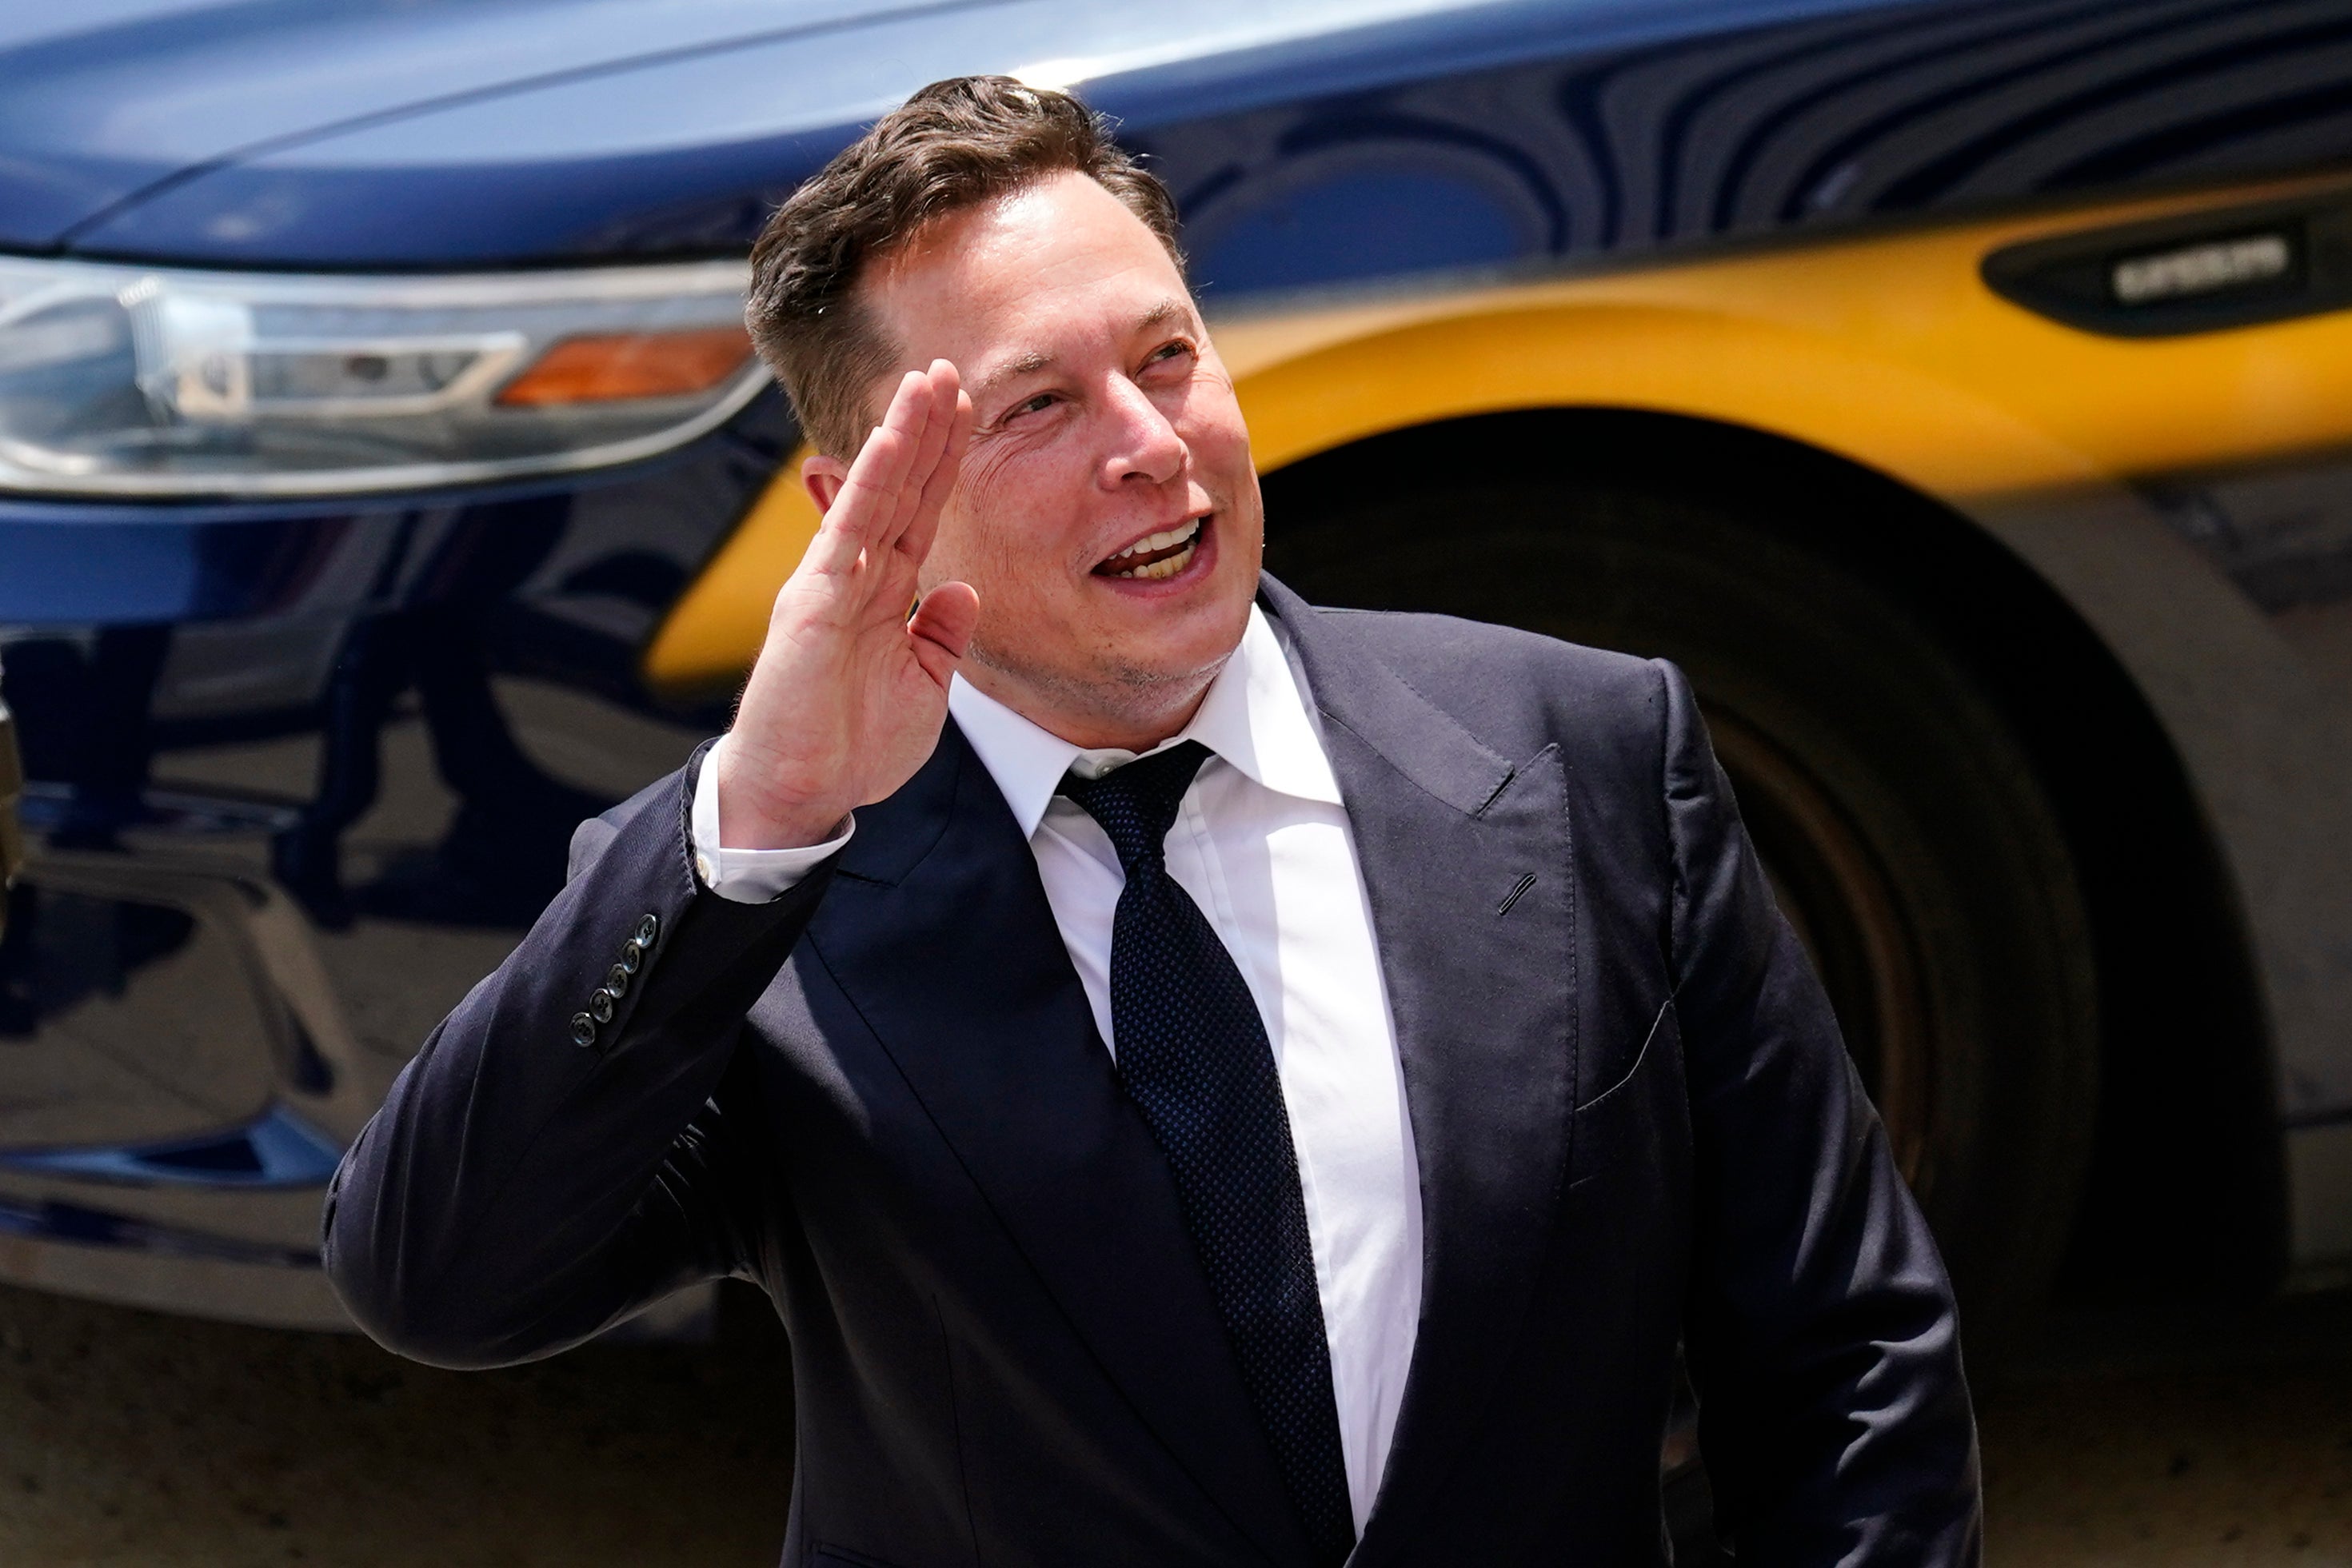 Tesla founder Elon Musk asked Twitter whether he should sell 10 per cent of his shares and pay tax on the gains